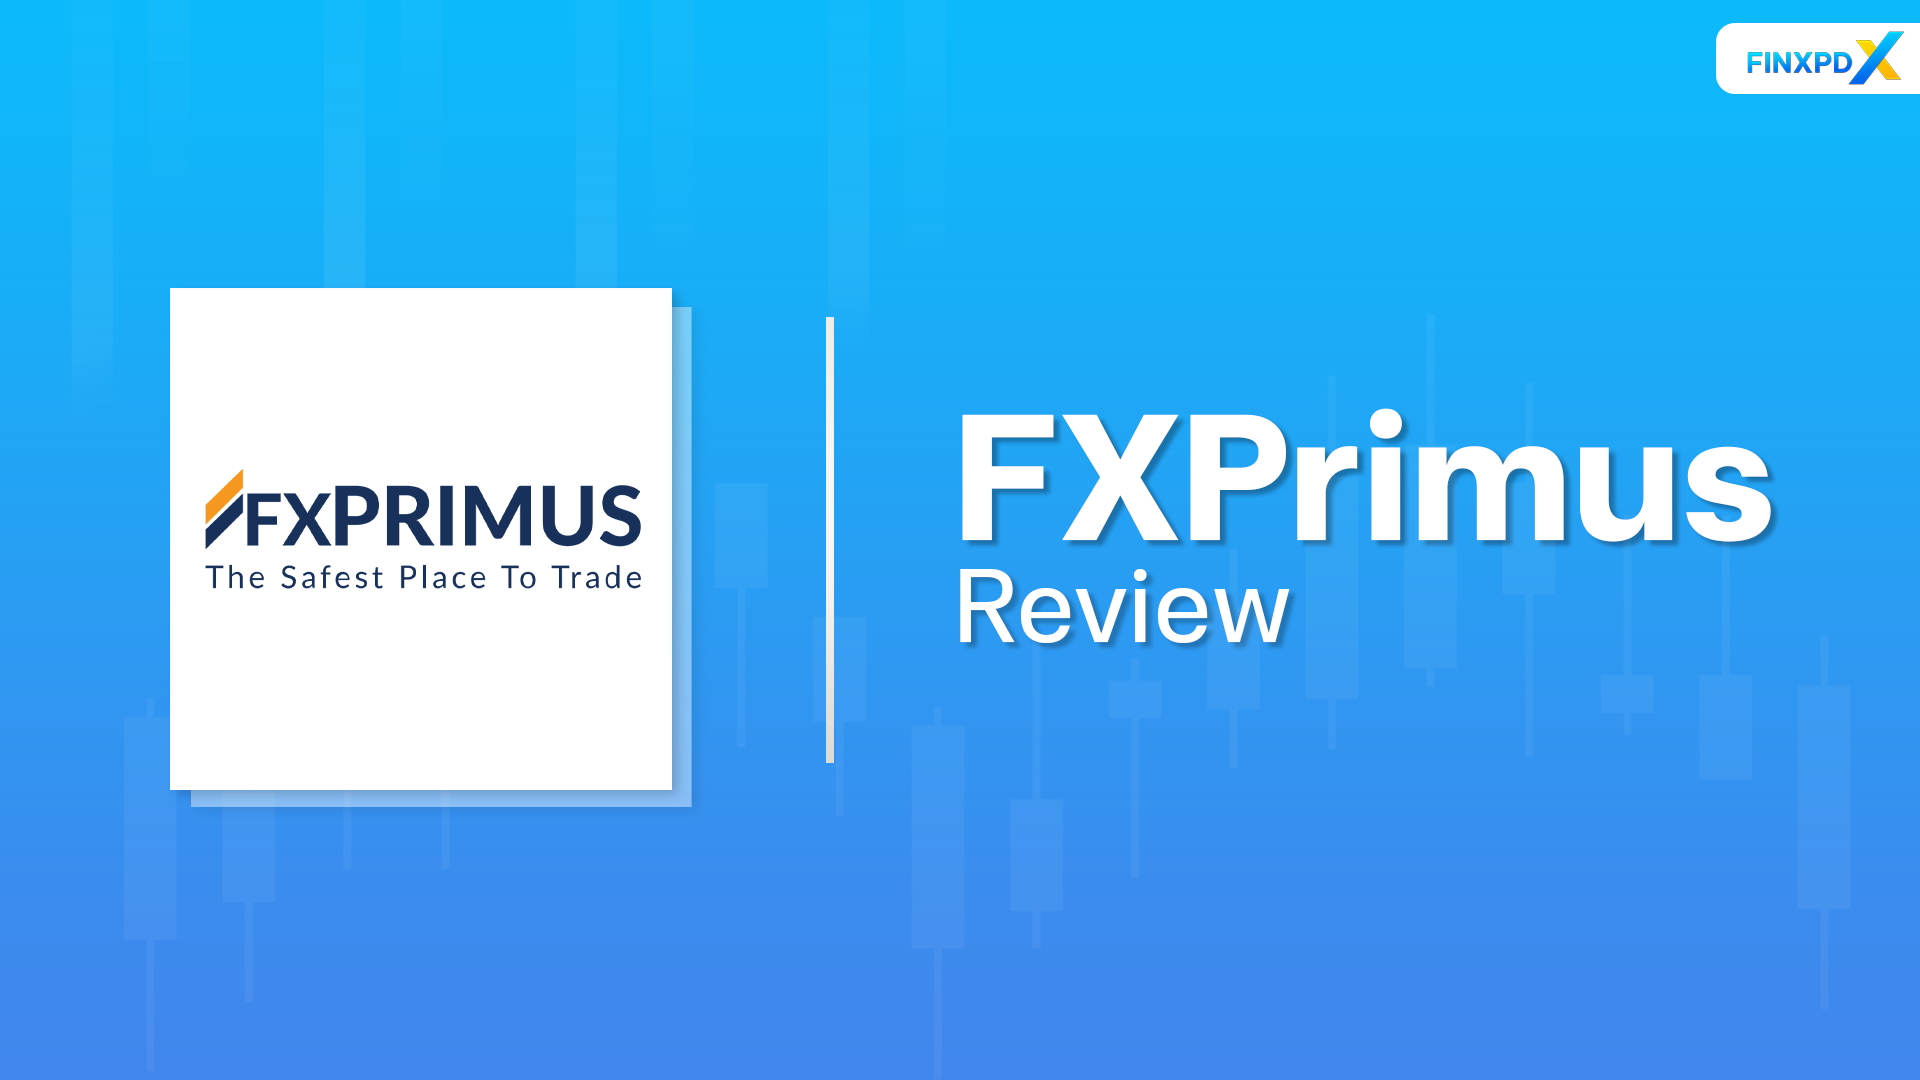 FXPrimus Review: Unbiased Expert Analysis